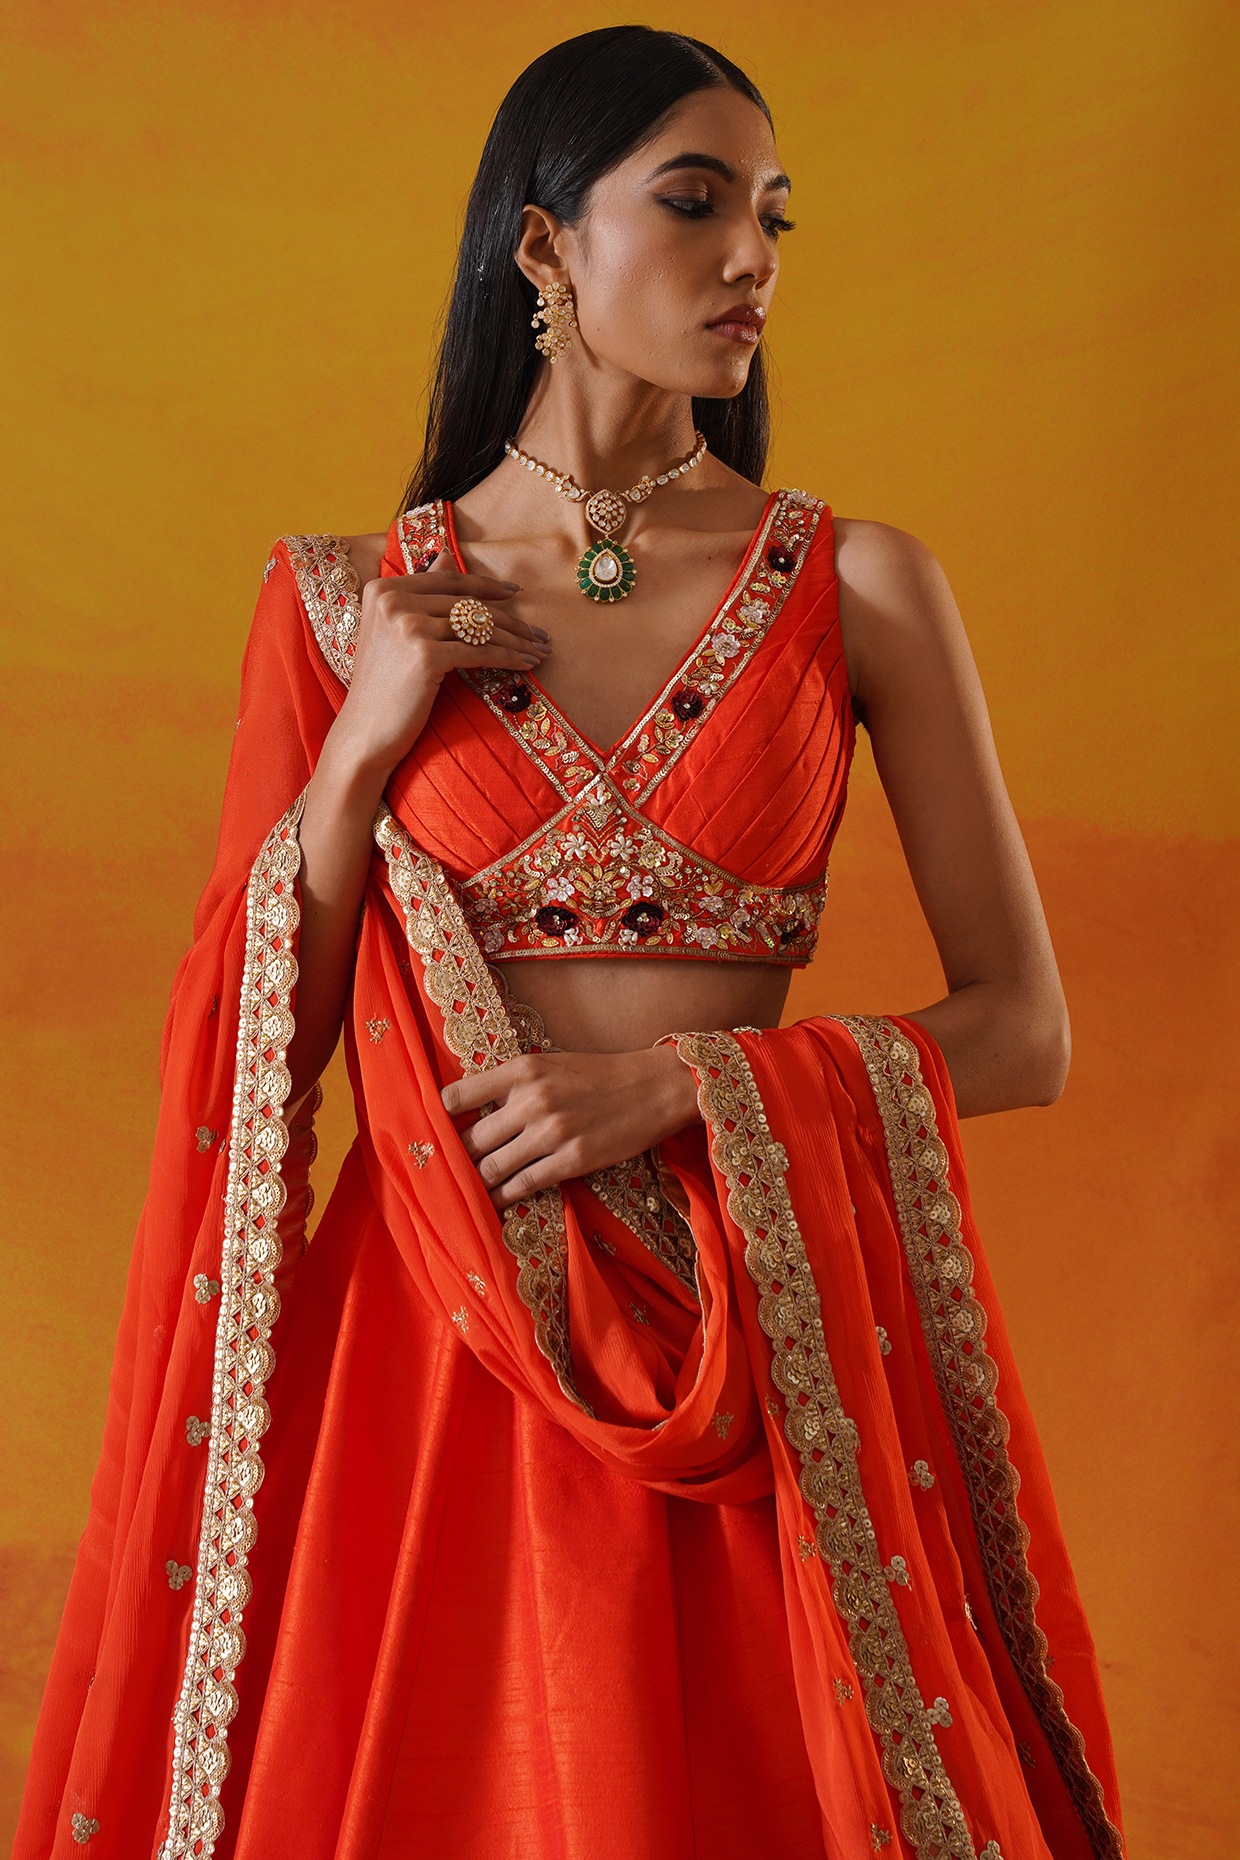 Punjabi Wedding With A Beautiful Orange Lehenga Paired With Stunning  Wedding Jewellery & Bridal Accessories To Drool Over! - Witty Vows |  Wedding lehenga designs, Beautiful pakistani dresses, Indian wedding outfits